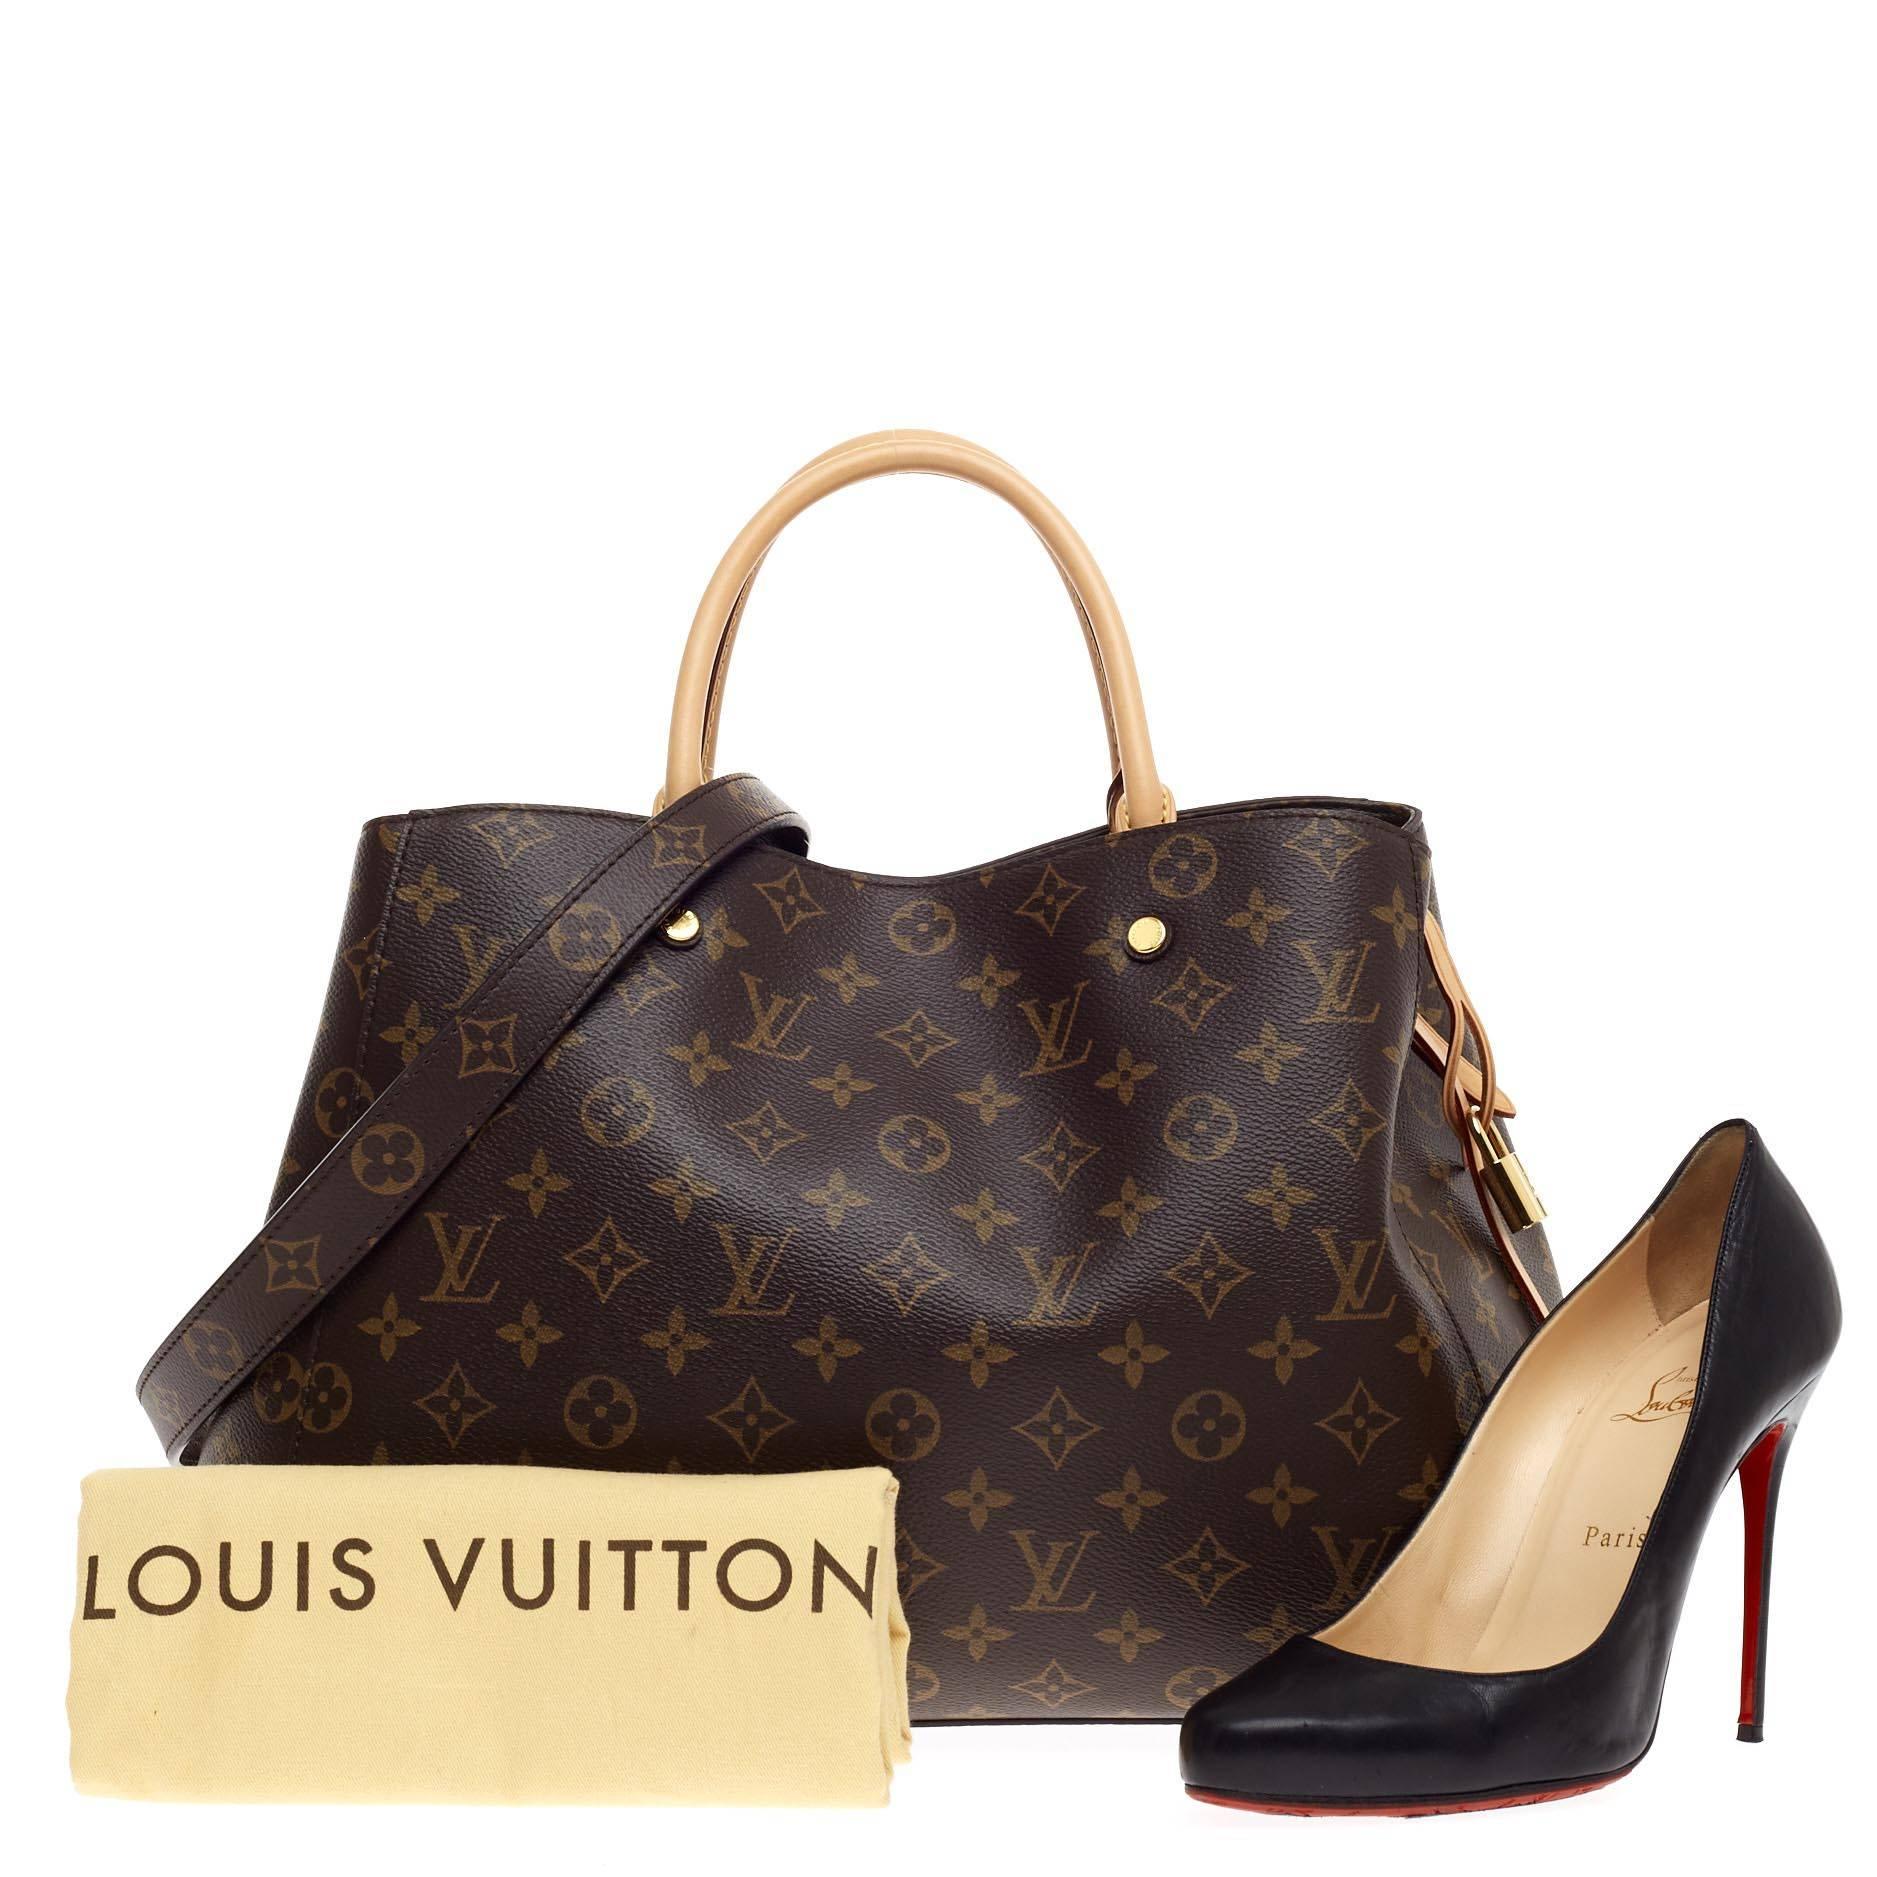 This authentic Louis Vuitton Montaigne Monogram Canvas GM named after the famed Parisian location is as sophisticated as it is sturdy. Crafted from the iconic Louis Vuitton's brown monogram printed canvas, this tote features dual-rolled vachetta